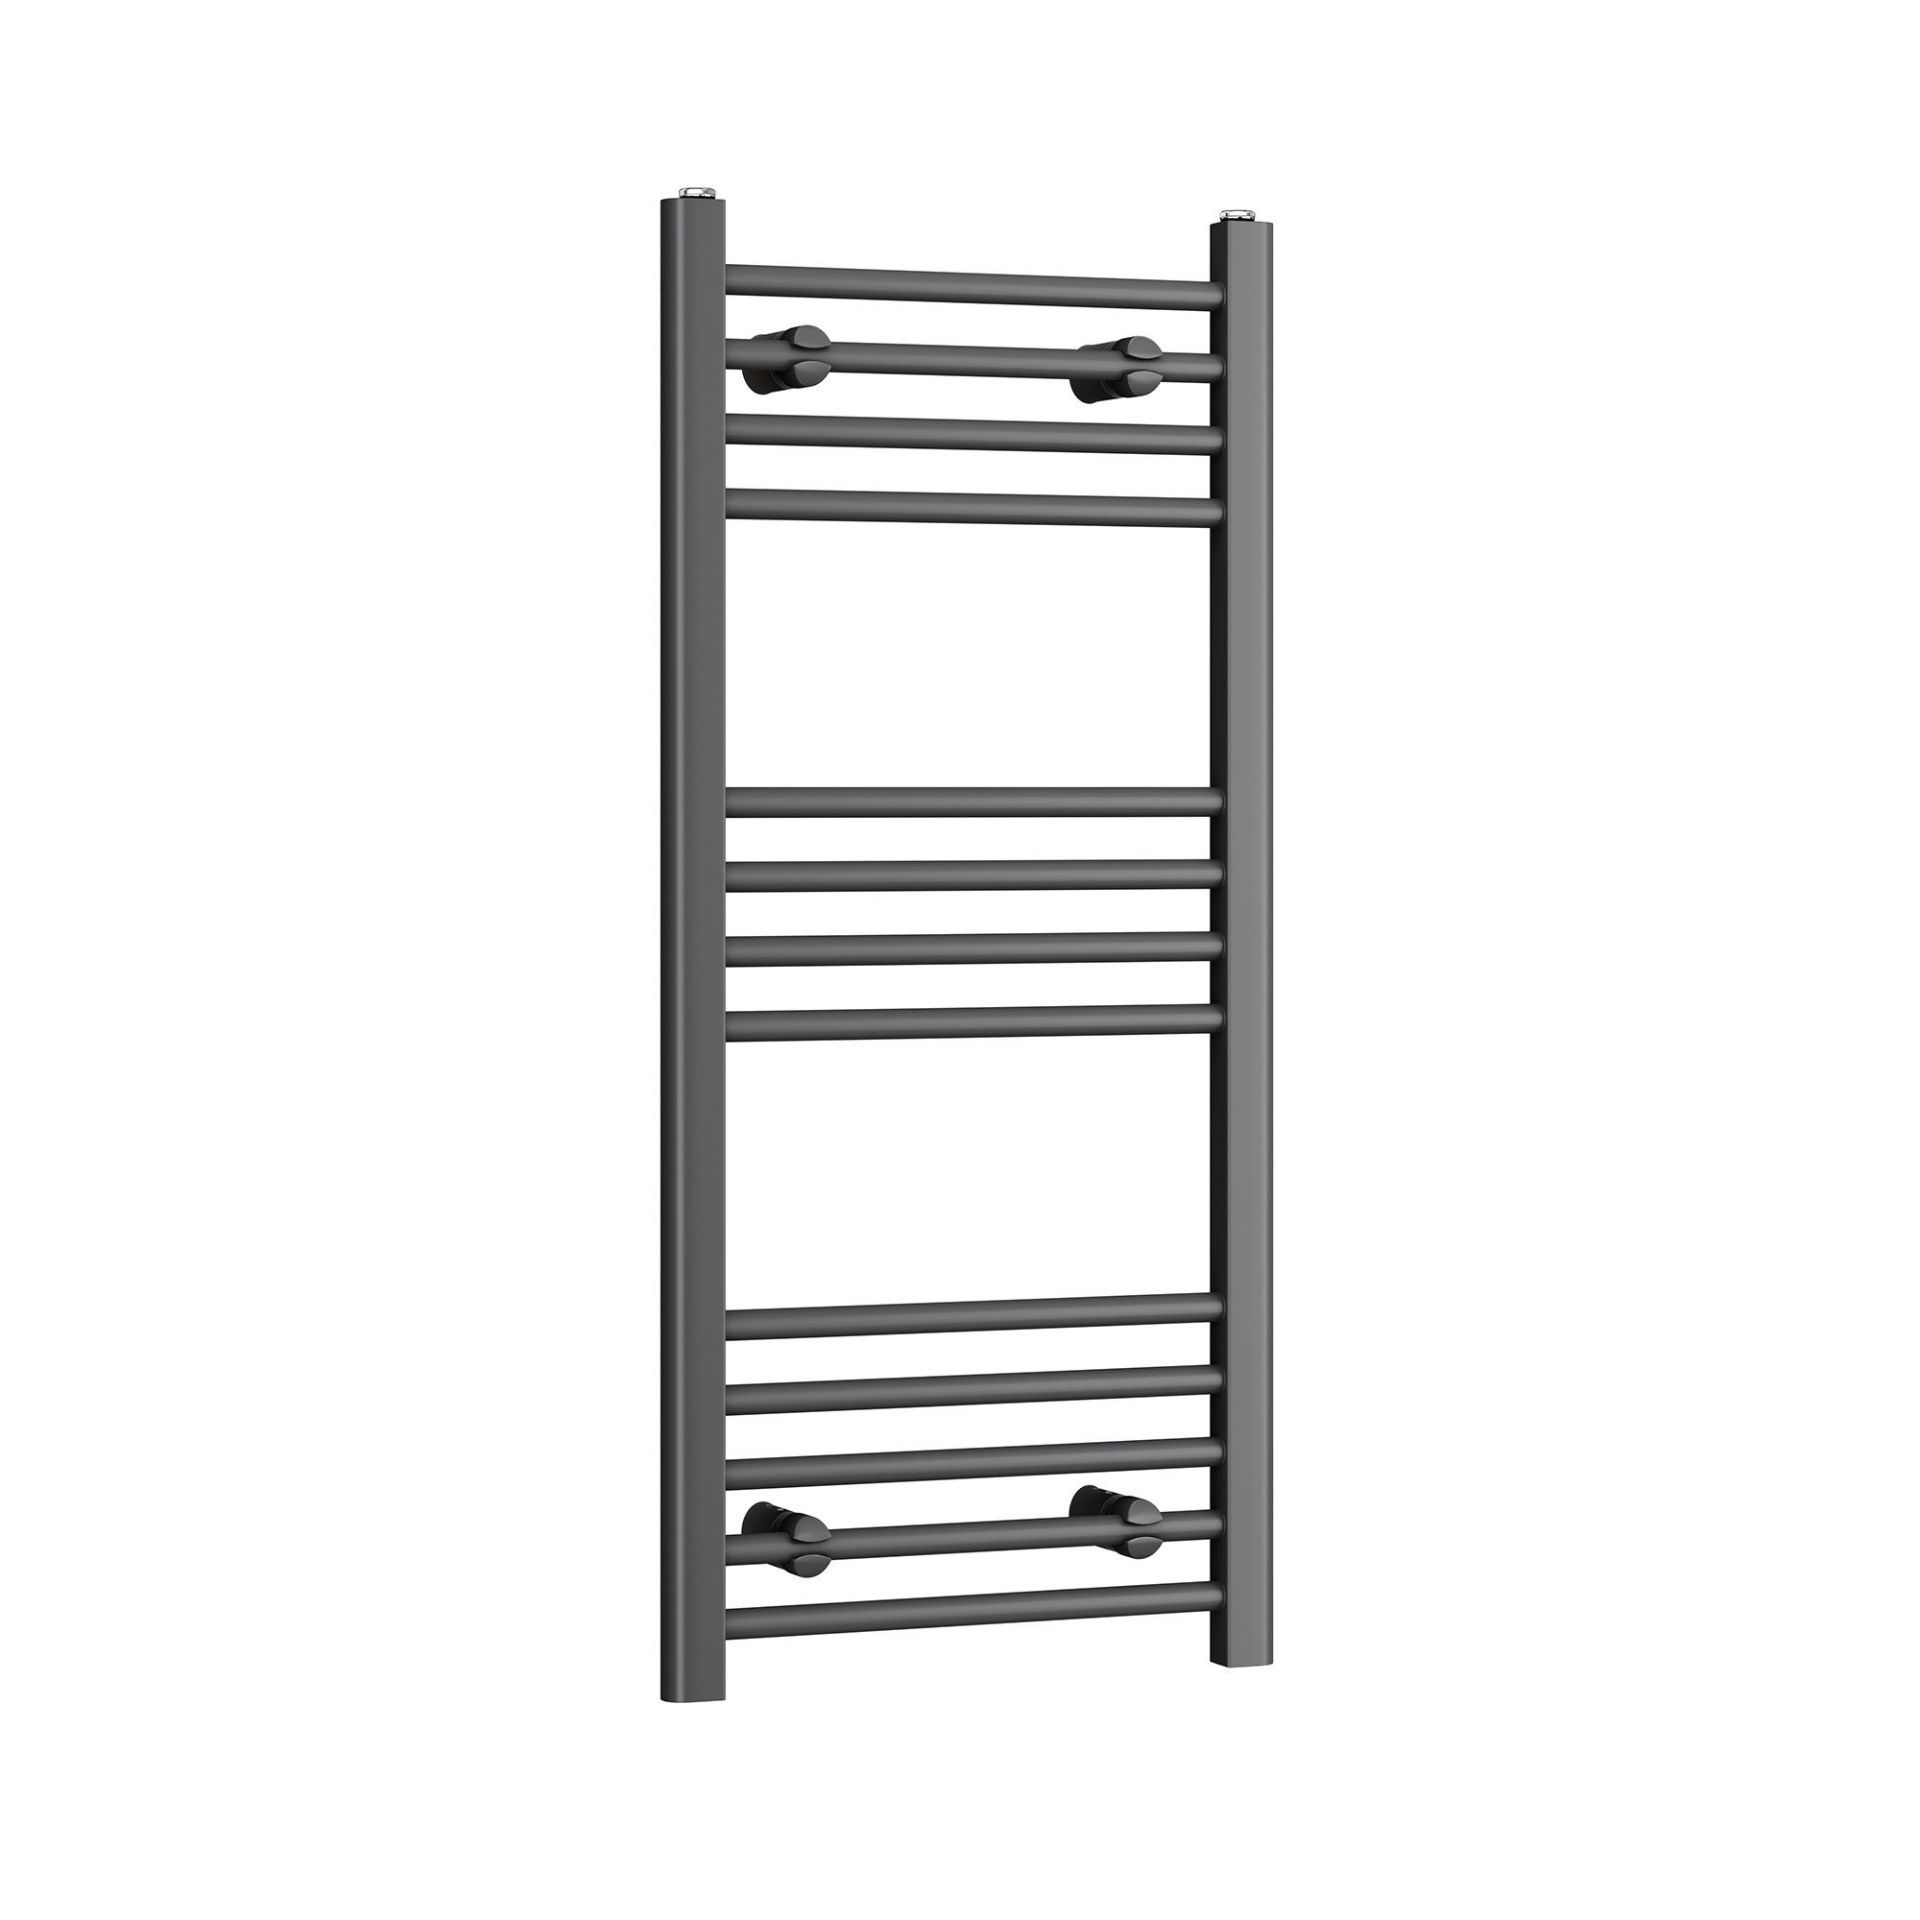 (LP73) 1000x450mm - 20mm Tubes - Anthracite Heated Straight Rail Ladder Towel Radiator. Corrosion - Image 3 of 3